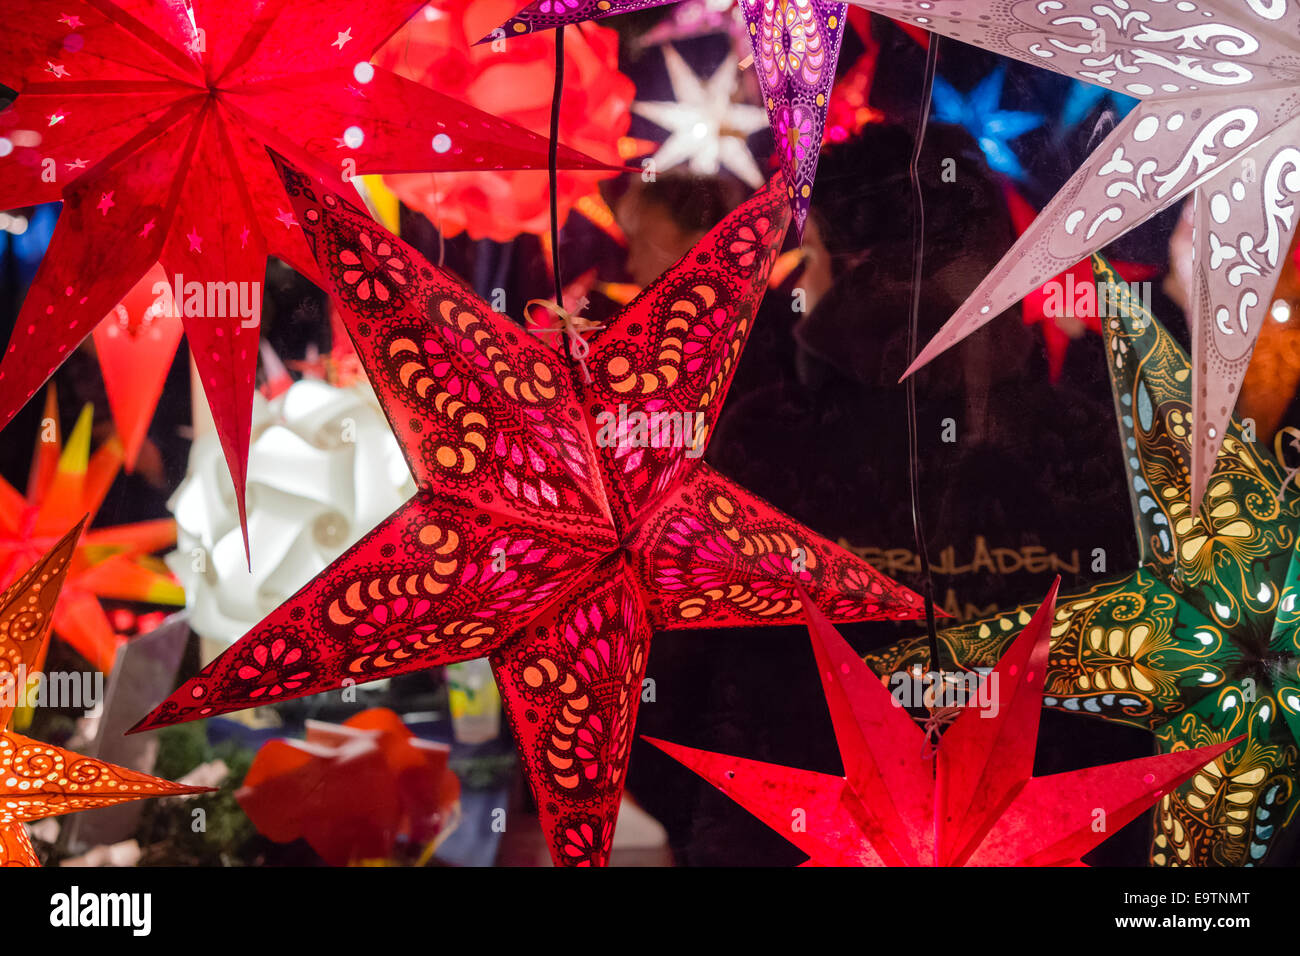 Festive star-shaped paper lanterns for sale at a German Christmas market  Stock Photo - Alamy